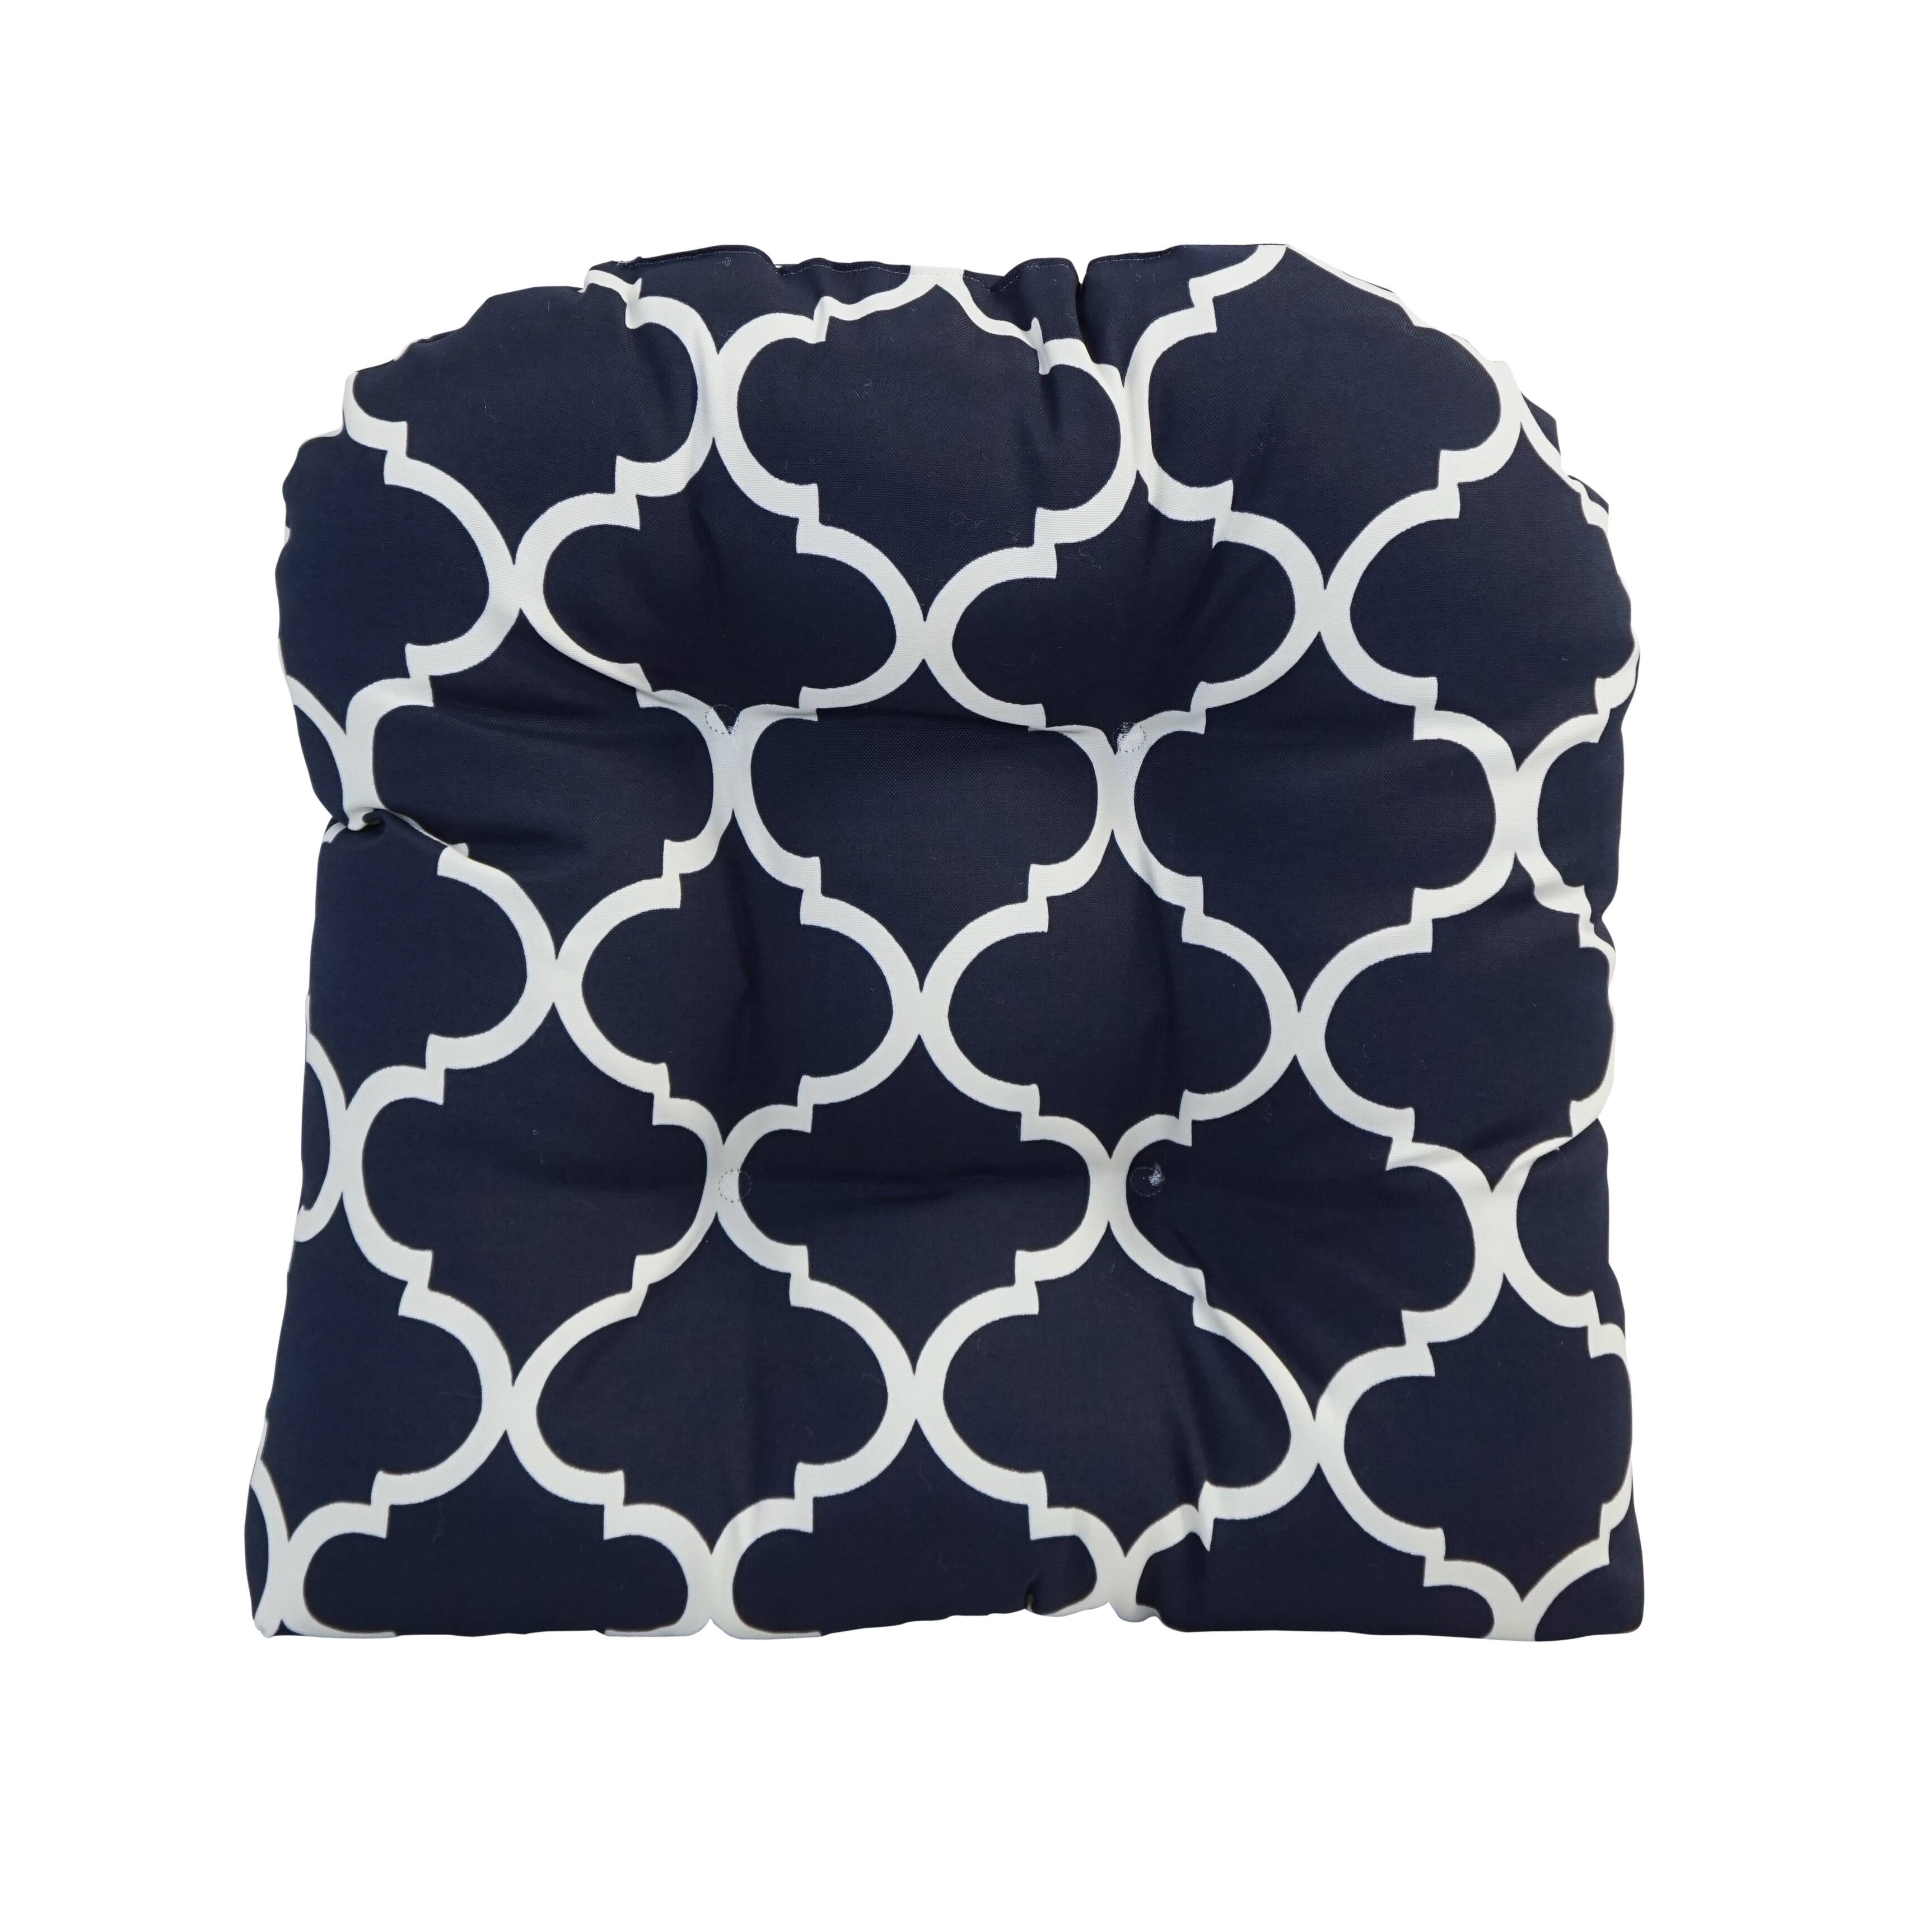 19-inch U-Shaped Dining Chair Cushions (Set of 2) - Landview Navy